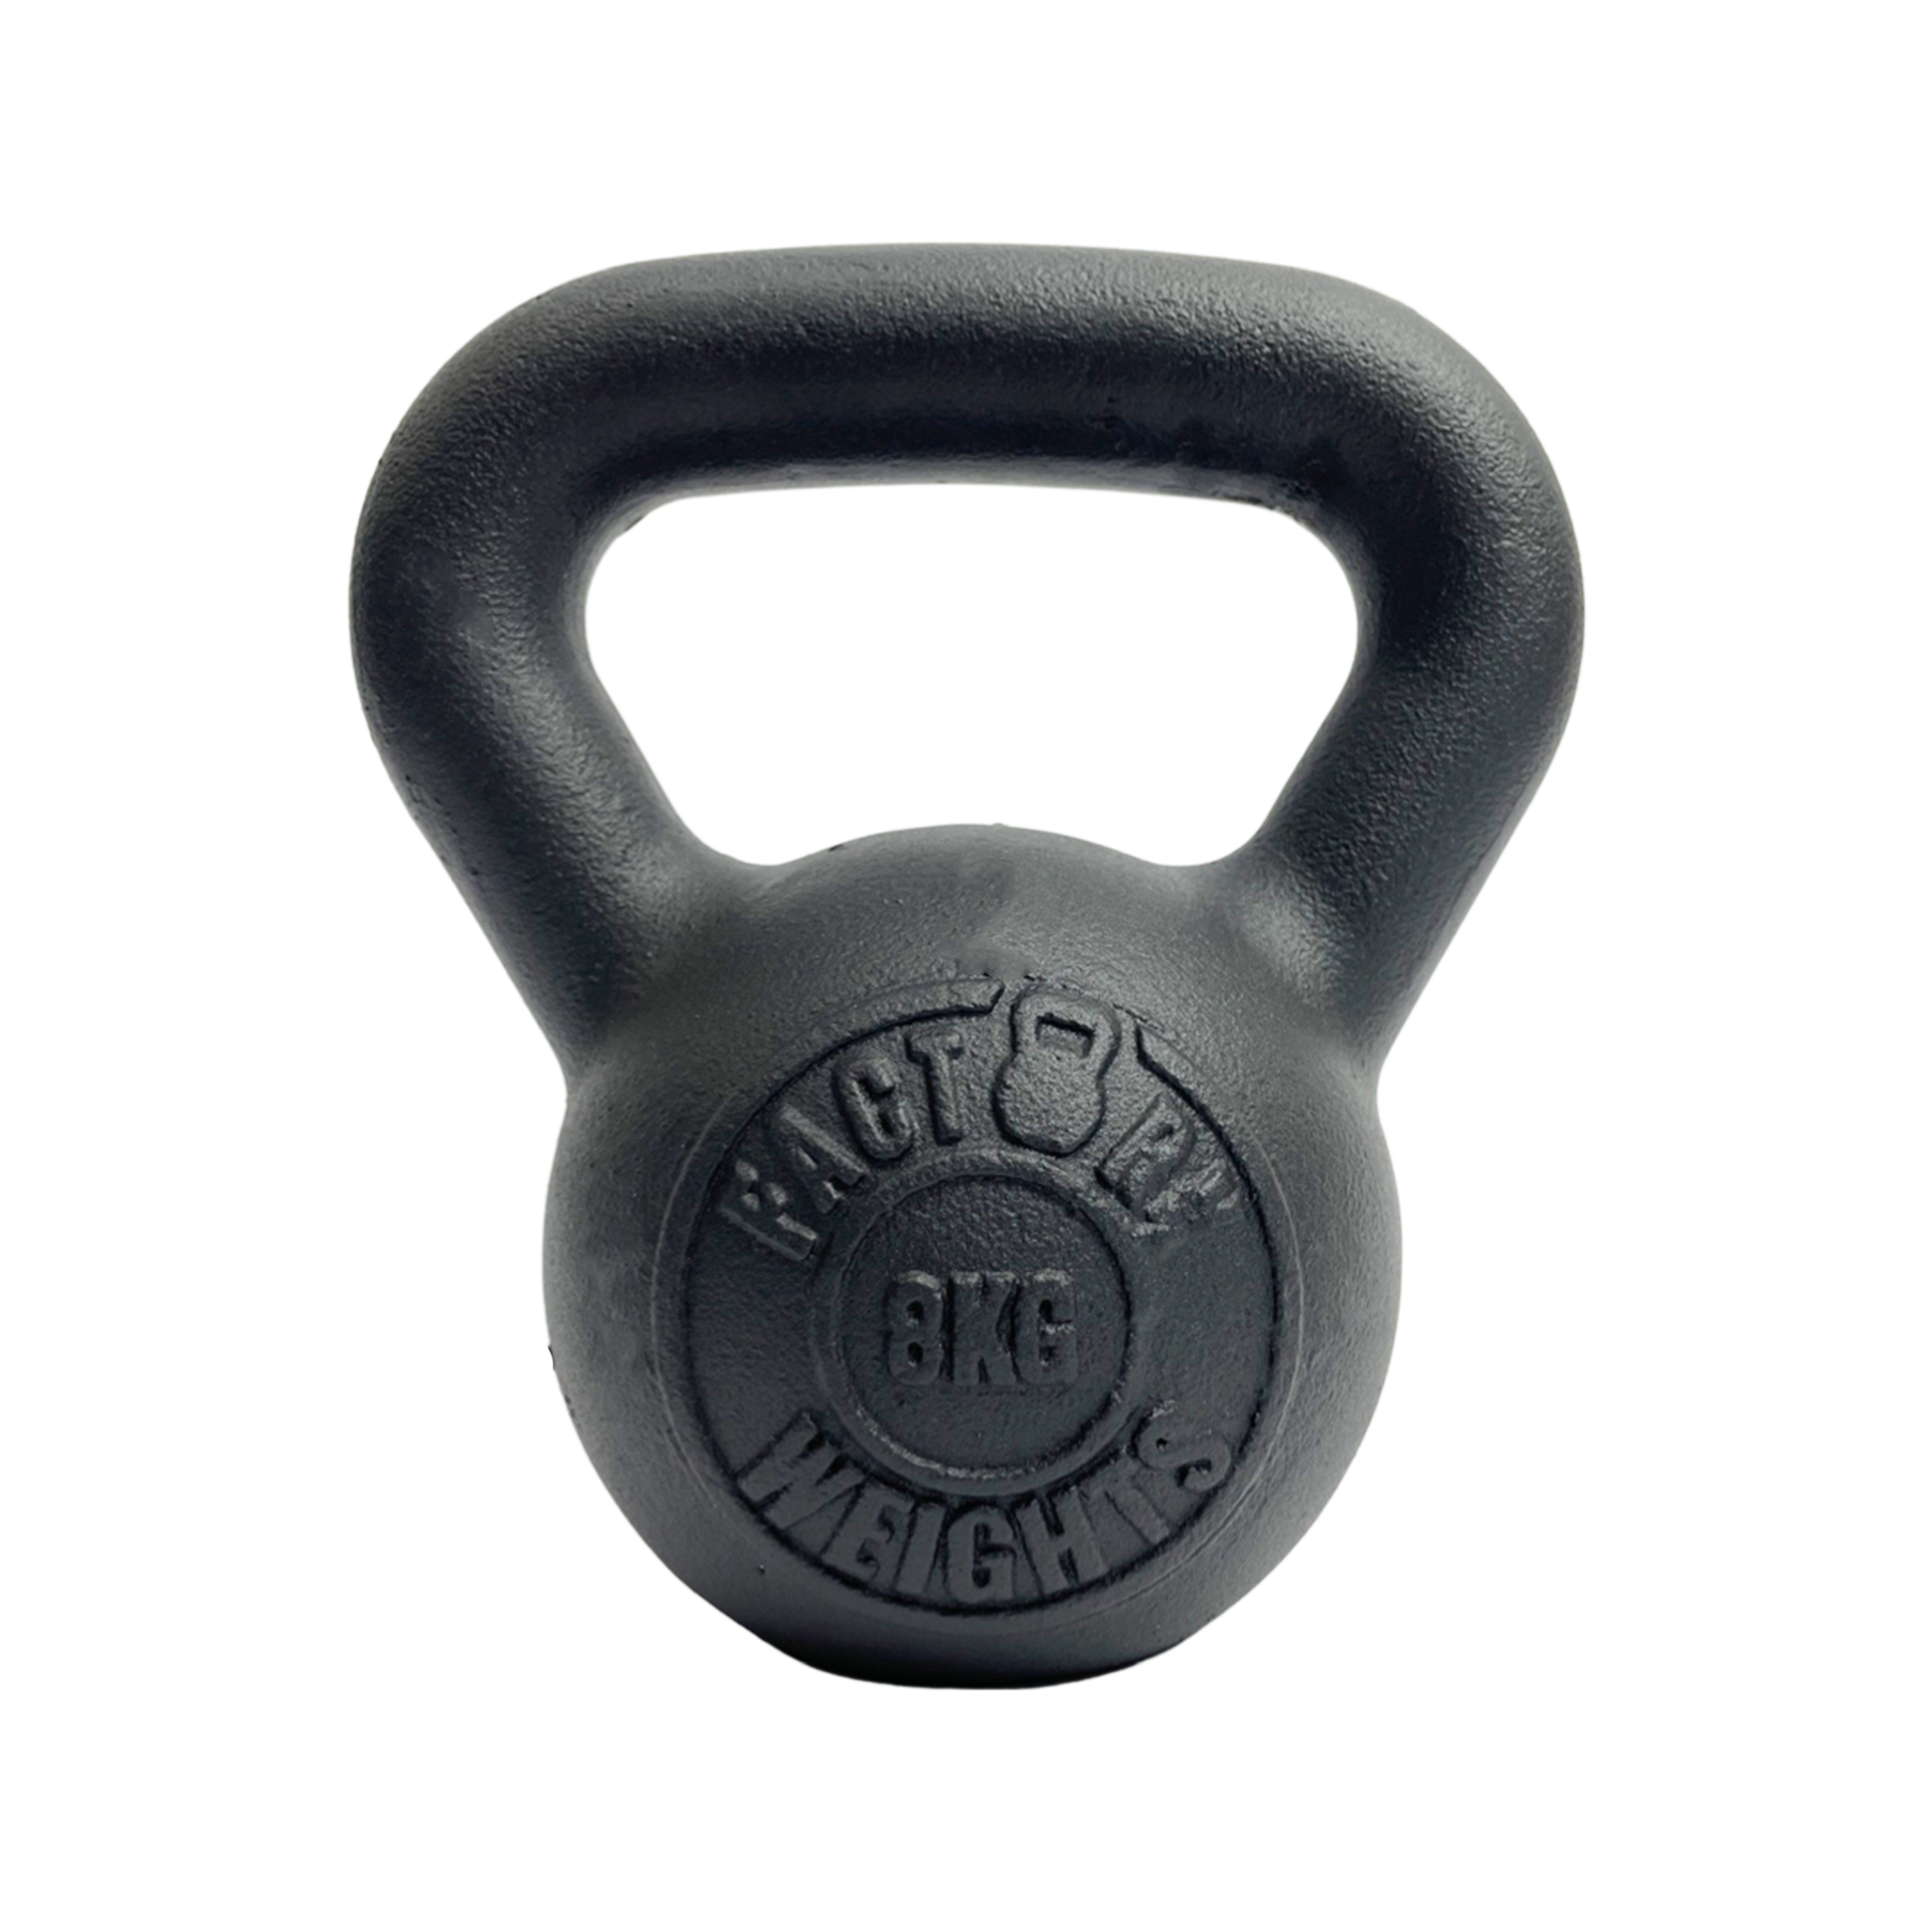 Pro Forged Kettlebells